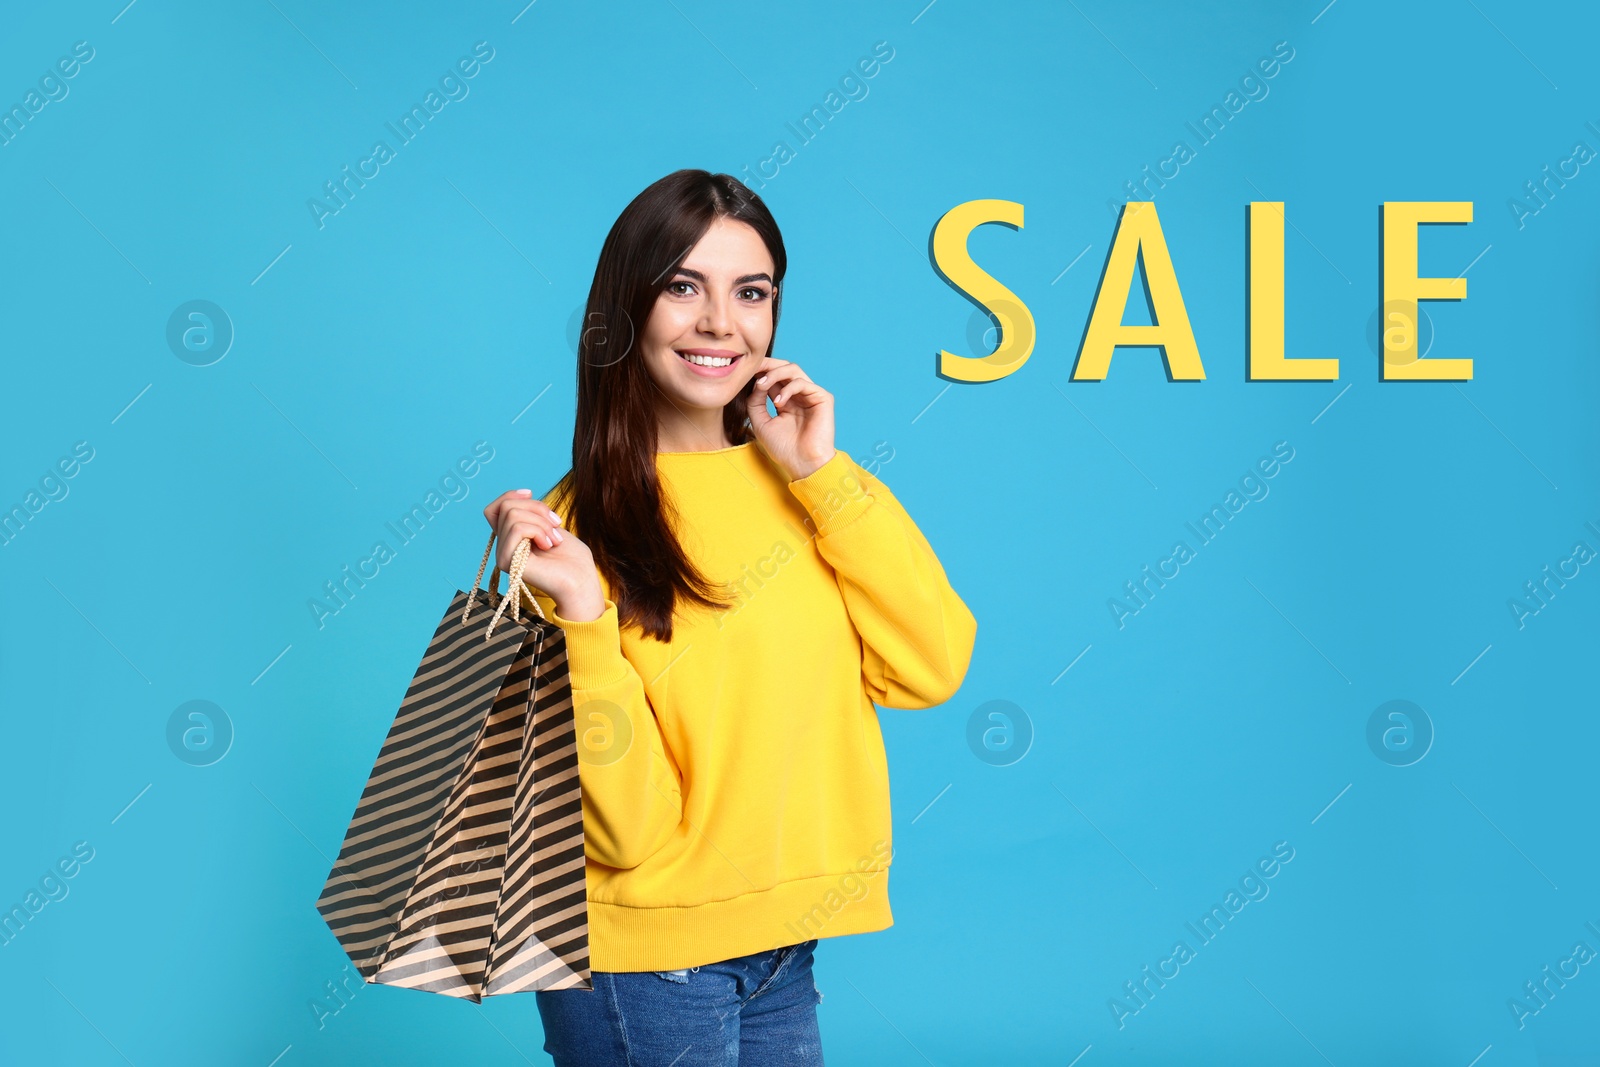 Image of Portrait of young woman with paper bags and word SALE on turquoise background